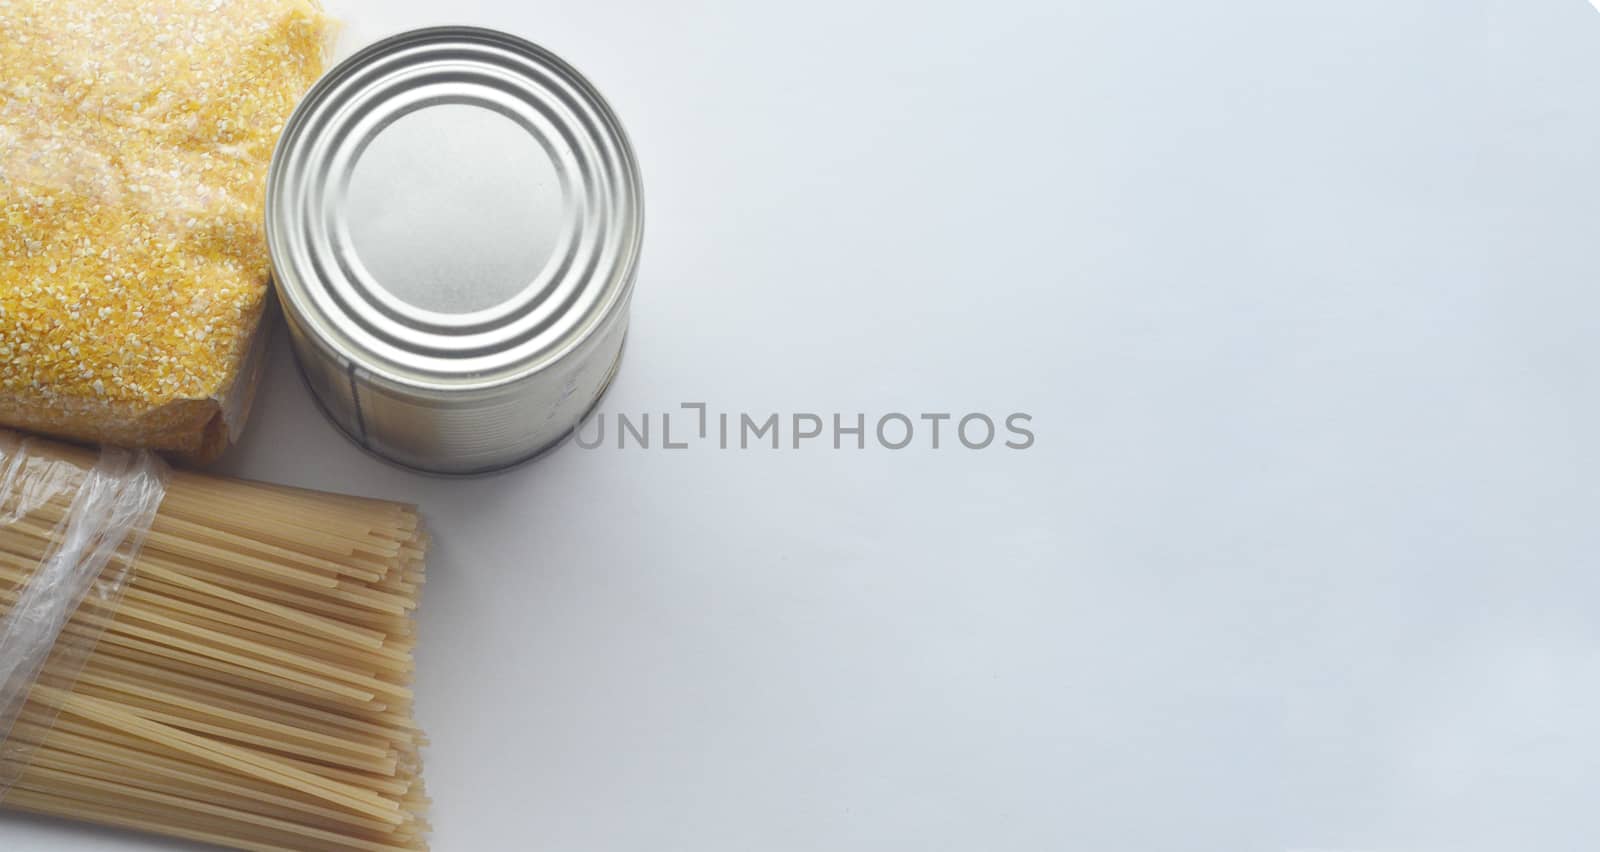 Food supplies, crisis food stock for quarantine isolation period on white background. Pasta, corn grits and canned food. Food delivery, coronavirus quarantine. Copyspace.